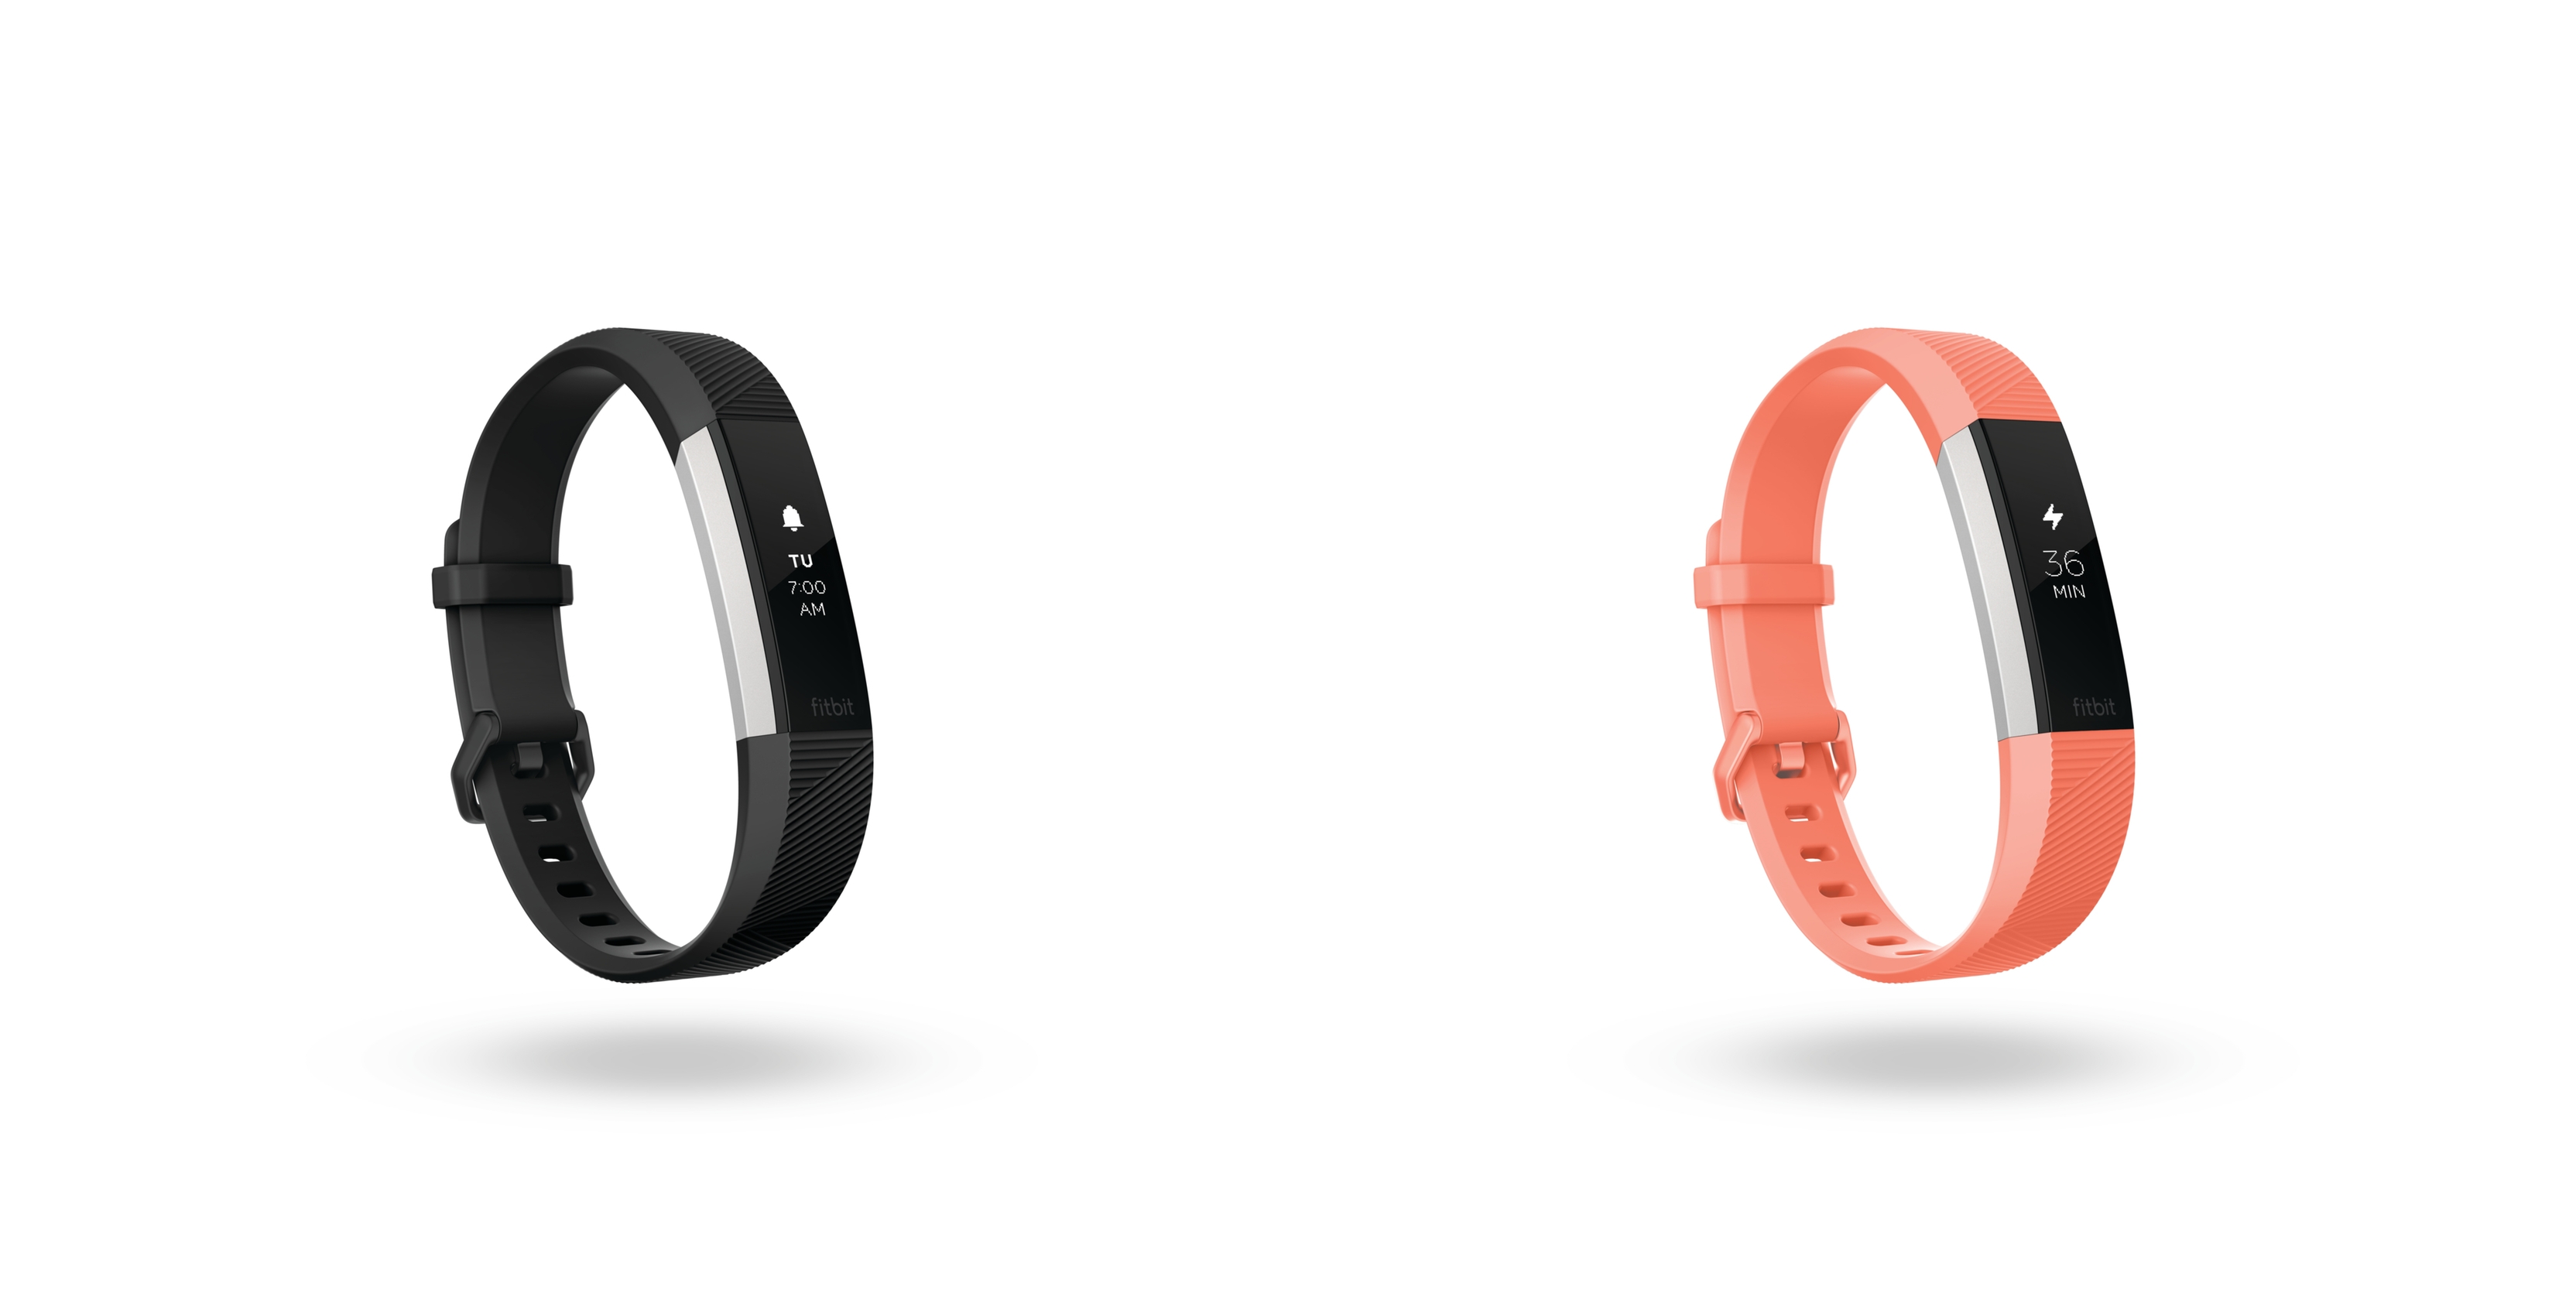 Alta HR is the smallest fitness tracker 